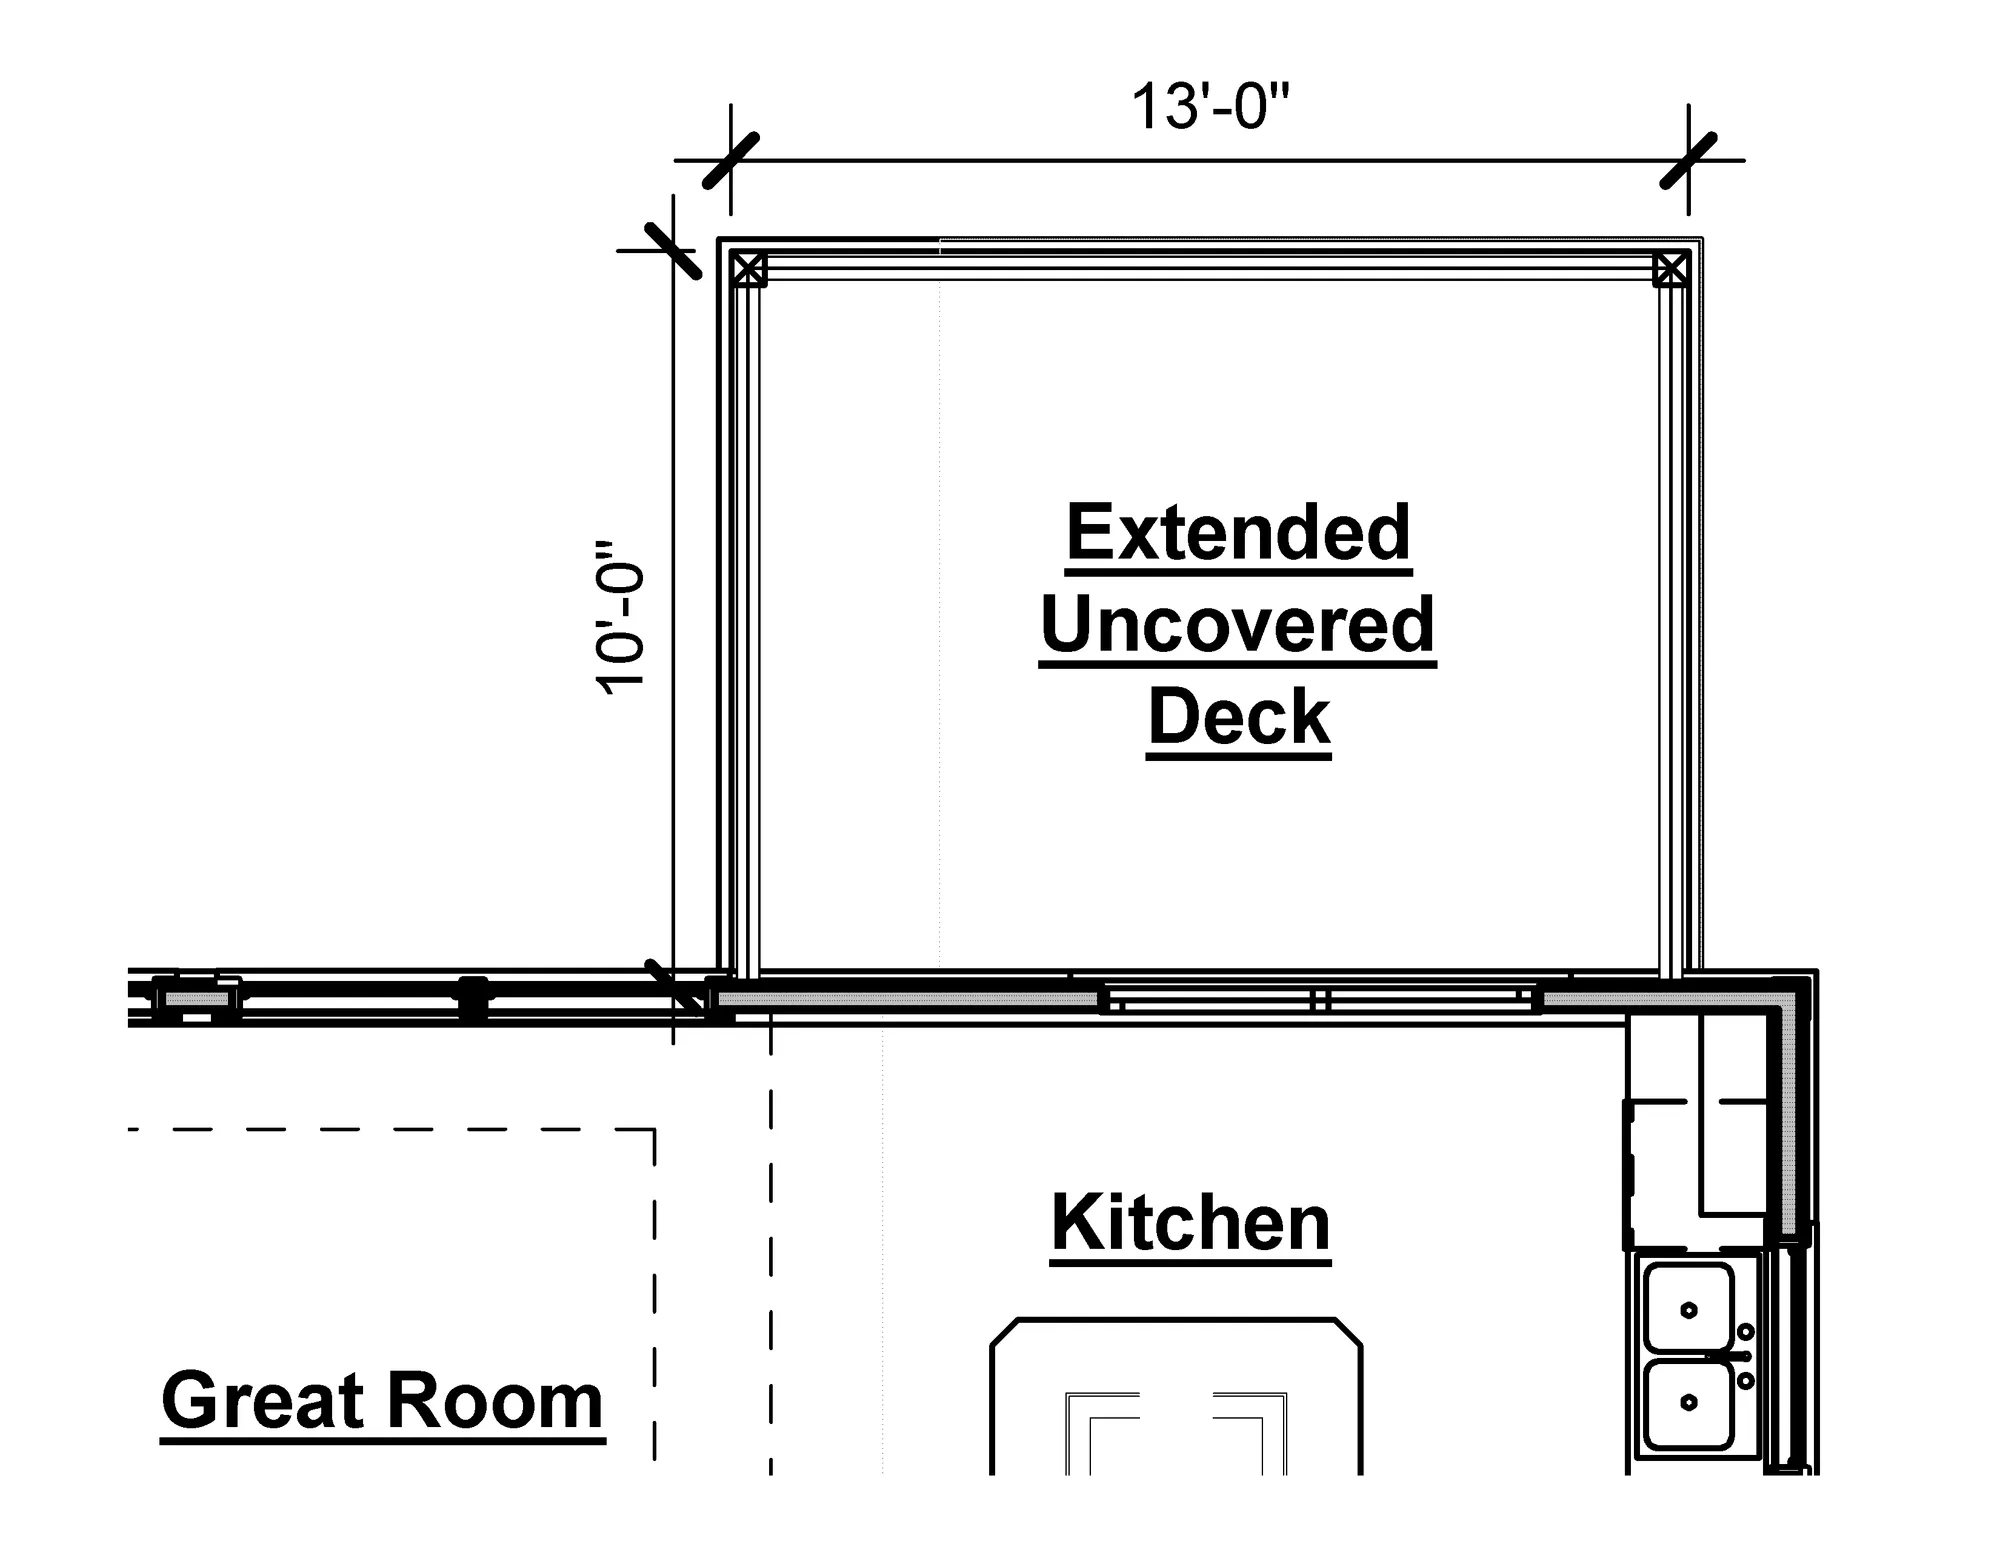 Extended Uncovered Deck Option - undefined